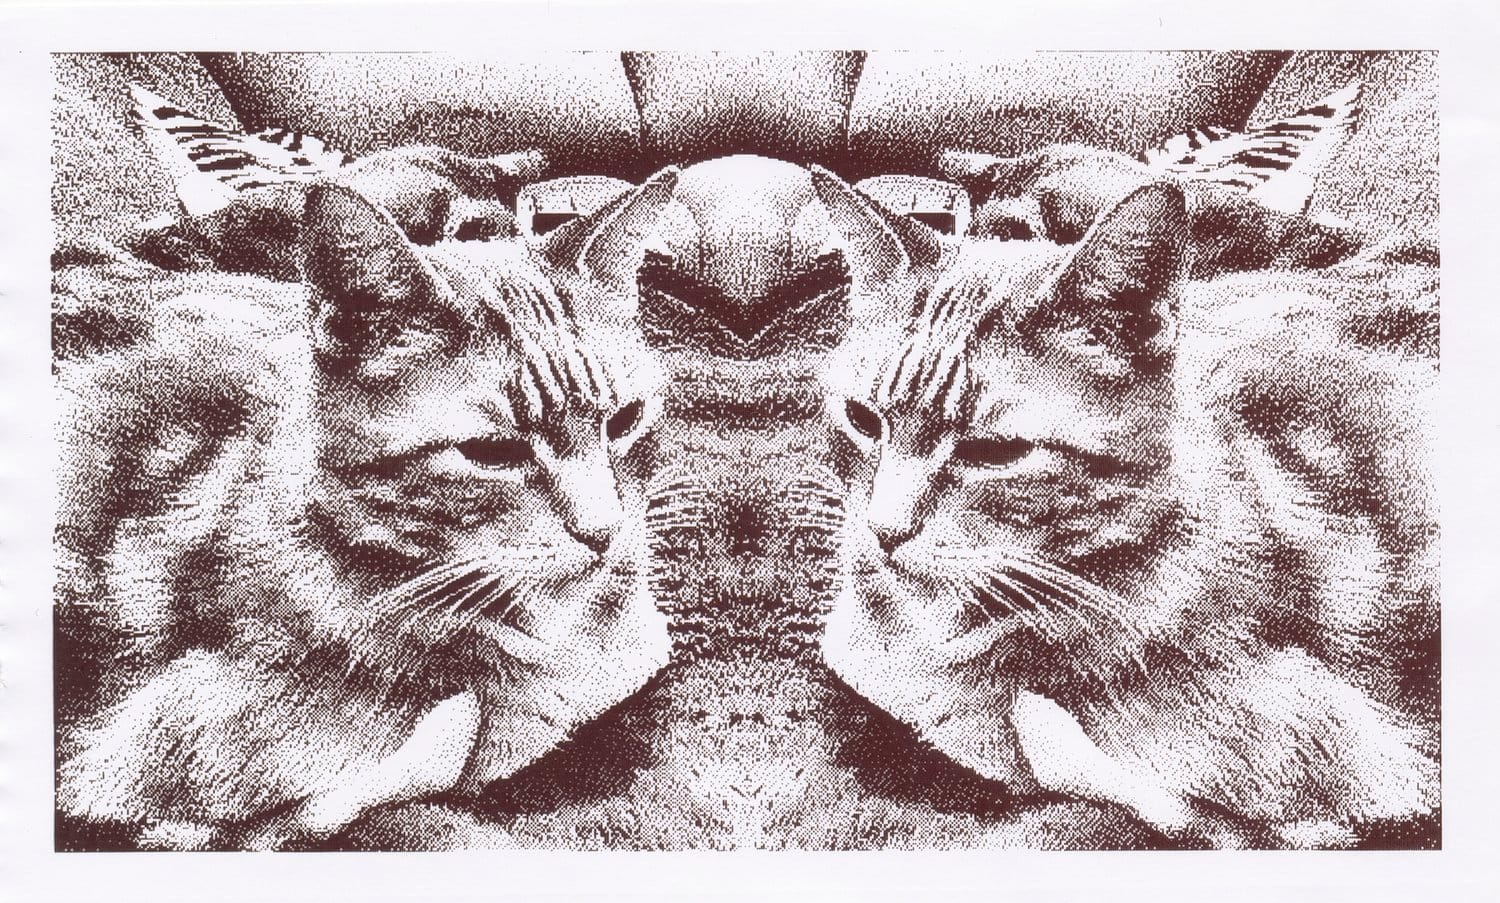 Grayscale thermal printed image of a cat, horizontally mirrored in a "special effect" shot